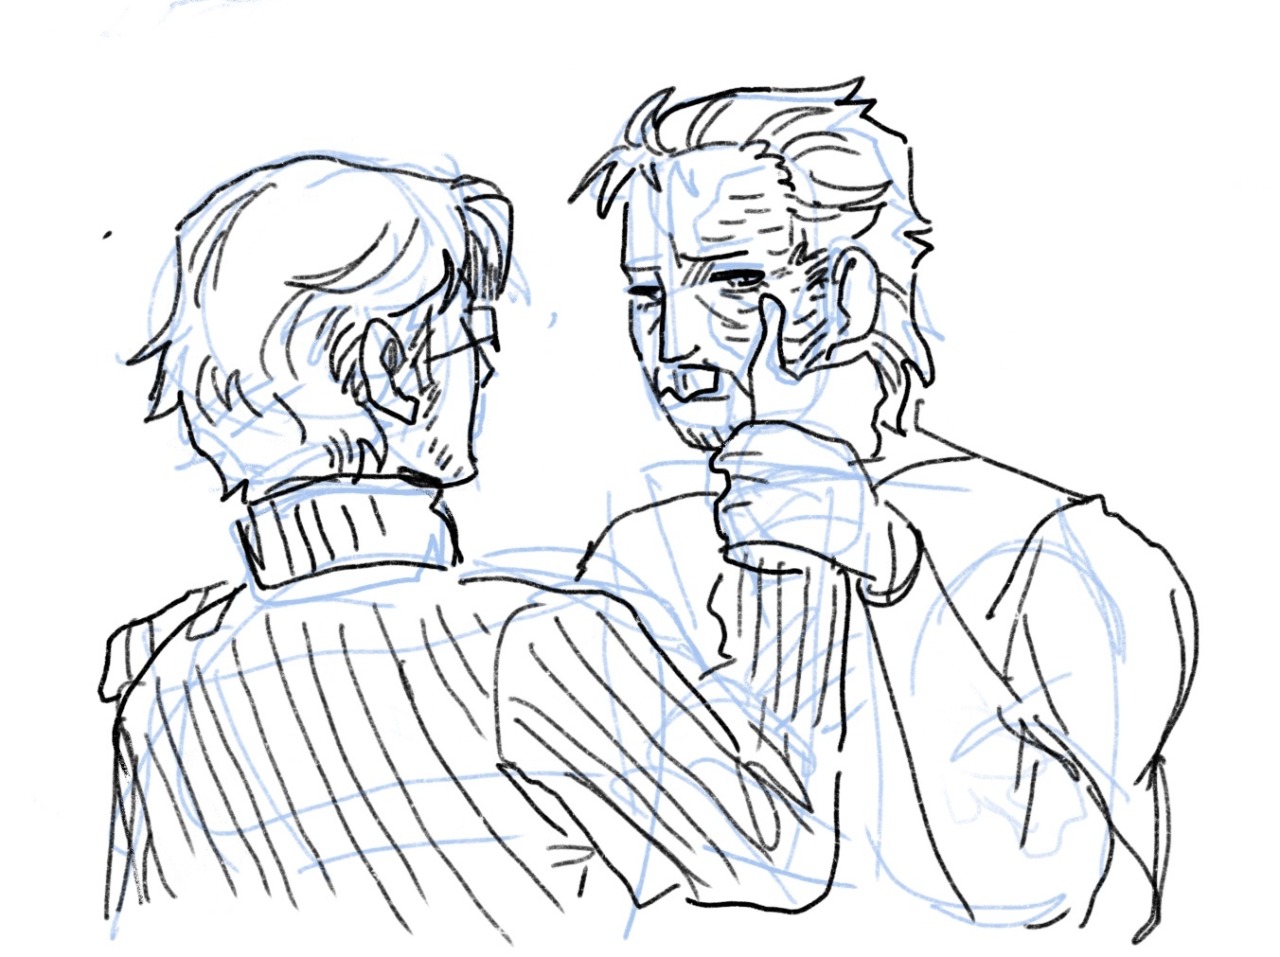 MGS4 era sketch, Otacon holding a scarred Old Snake's cheek